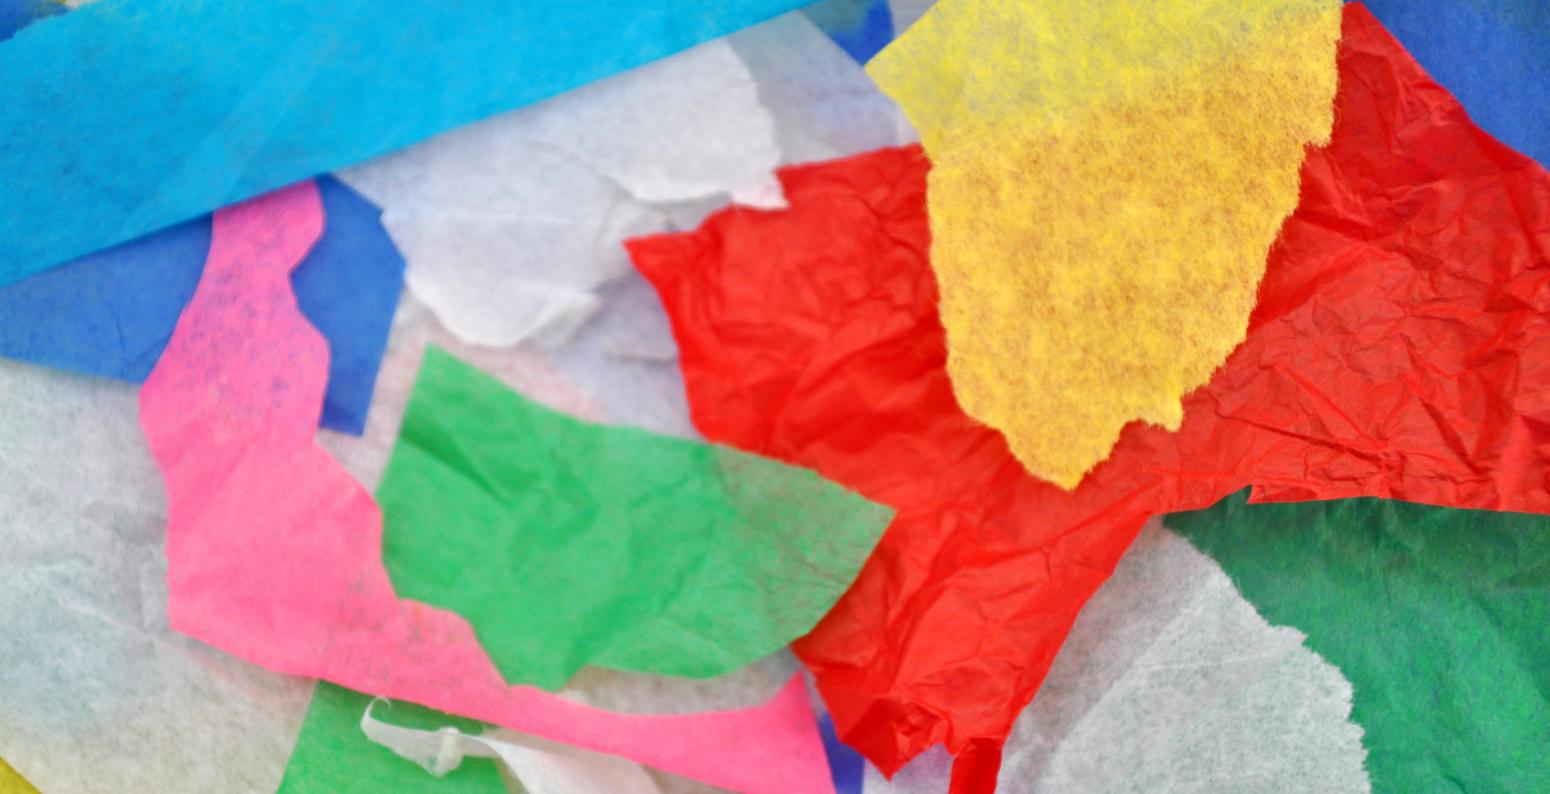 A collection of colorful, cut & torn tissue paper scraps.